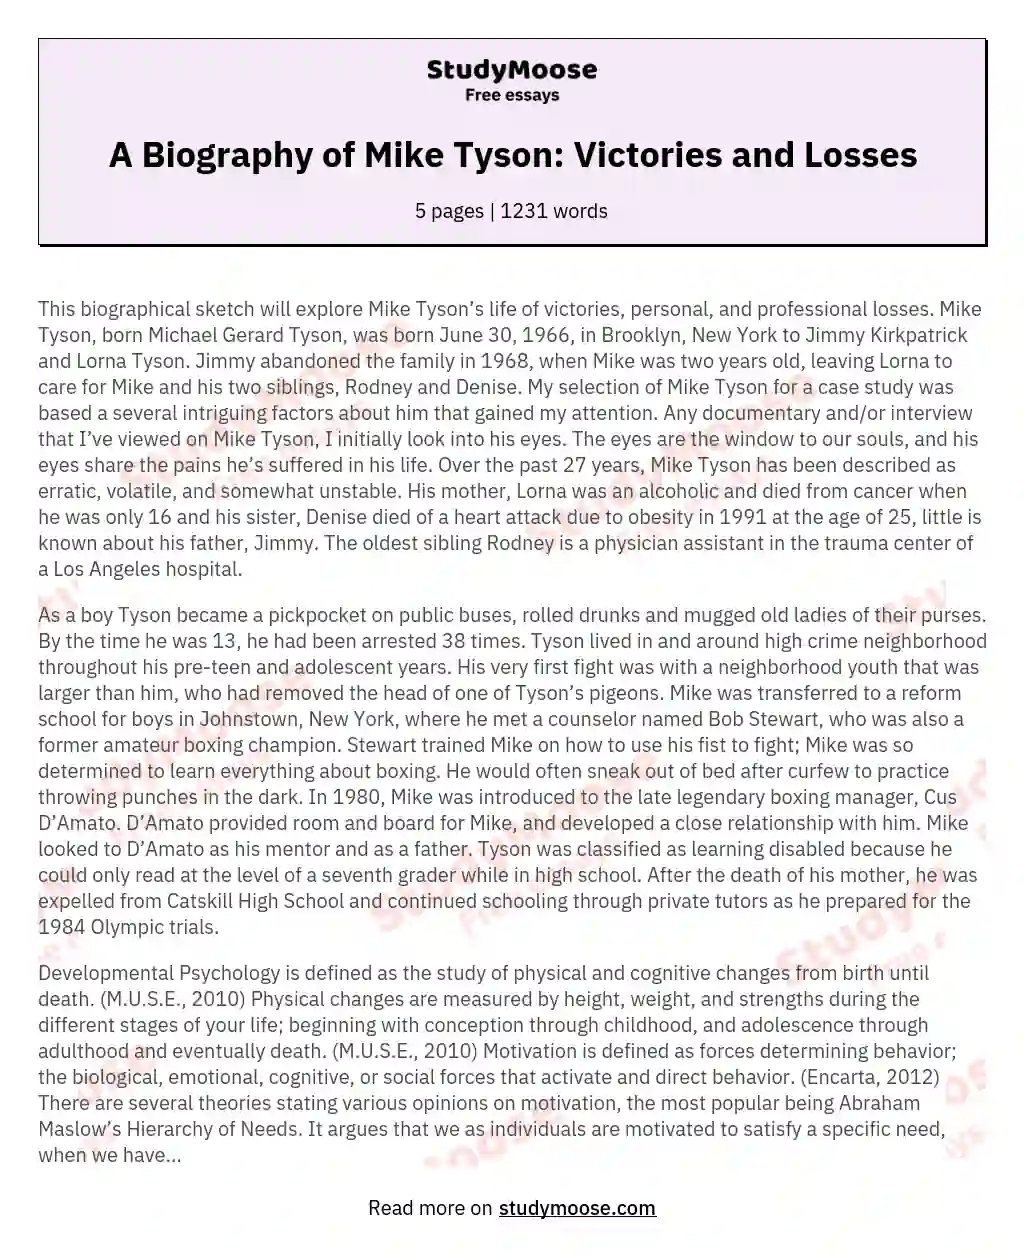 A Biography of Mike Tyson: Victories and Losses essay